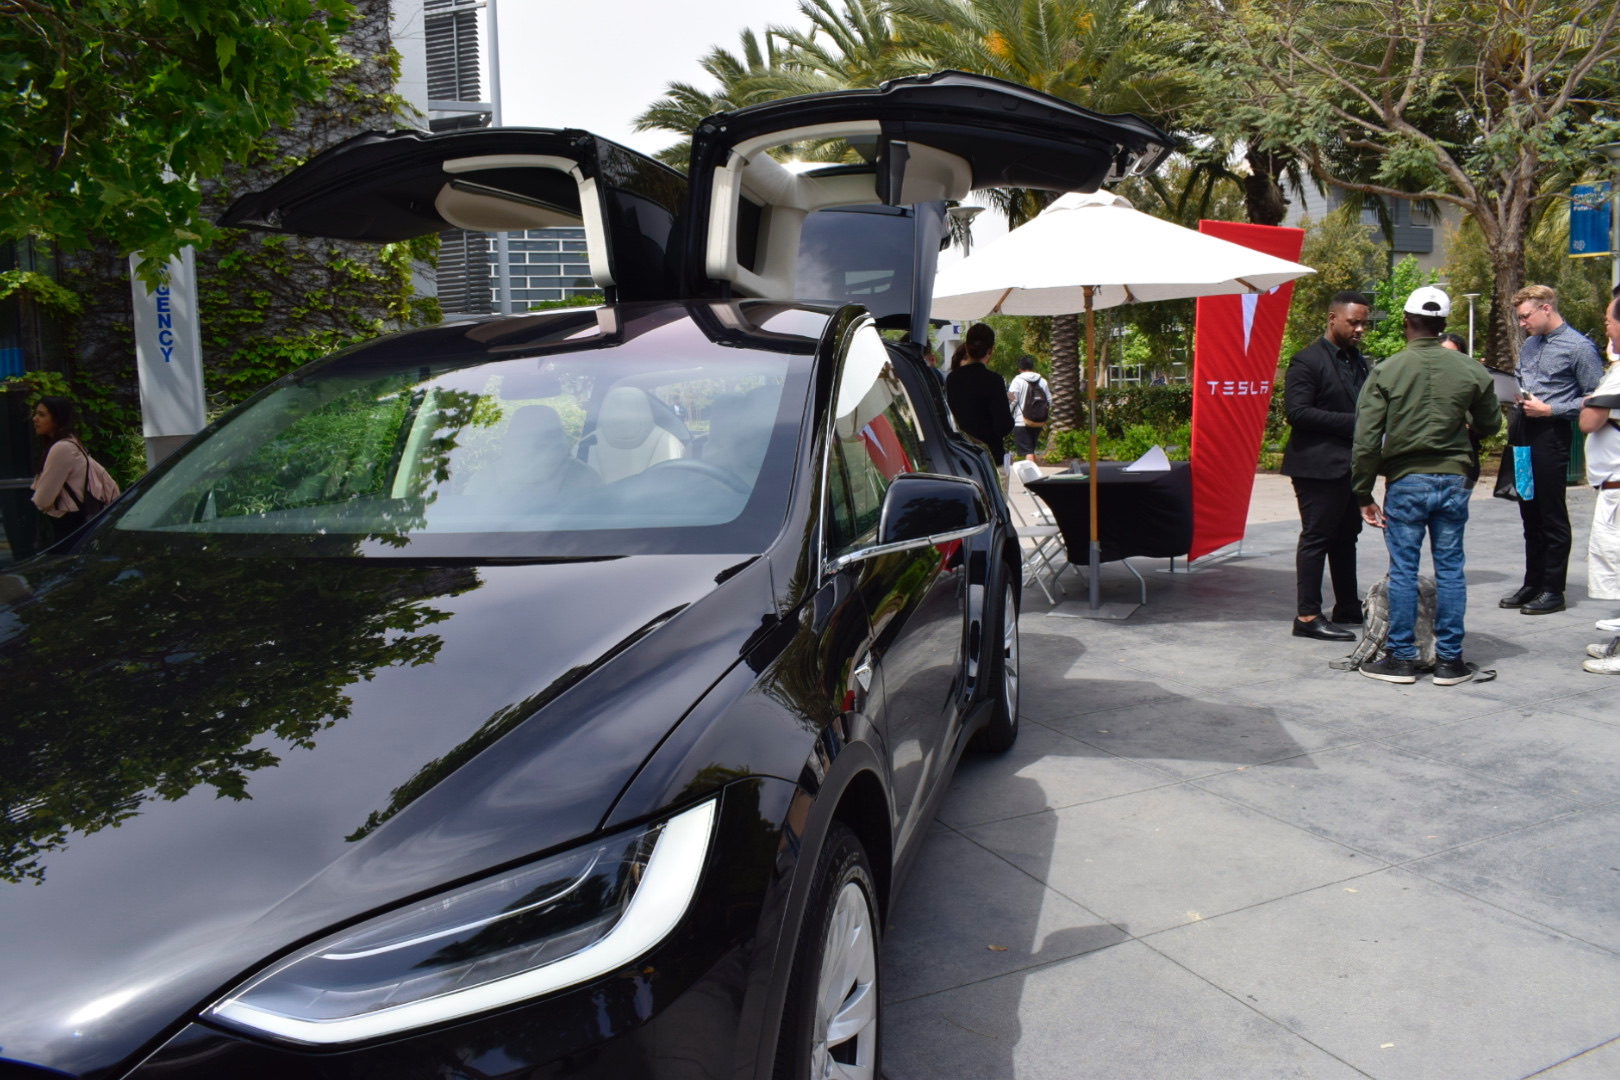  The Tesla car that was brought onto campus during the Job Fair at Santa Monica College on May 8, 2018. Tesla drew a lot of attention with the car and many students lined up with questions about job opportunities at their company. (Claudia Vardoni/ C